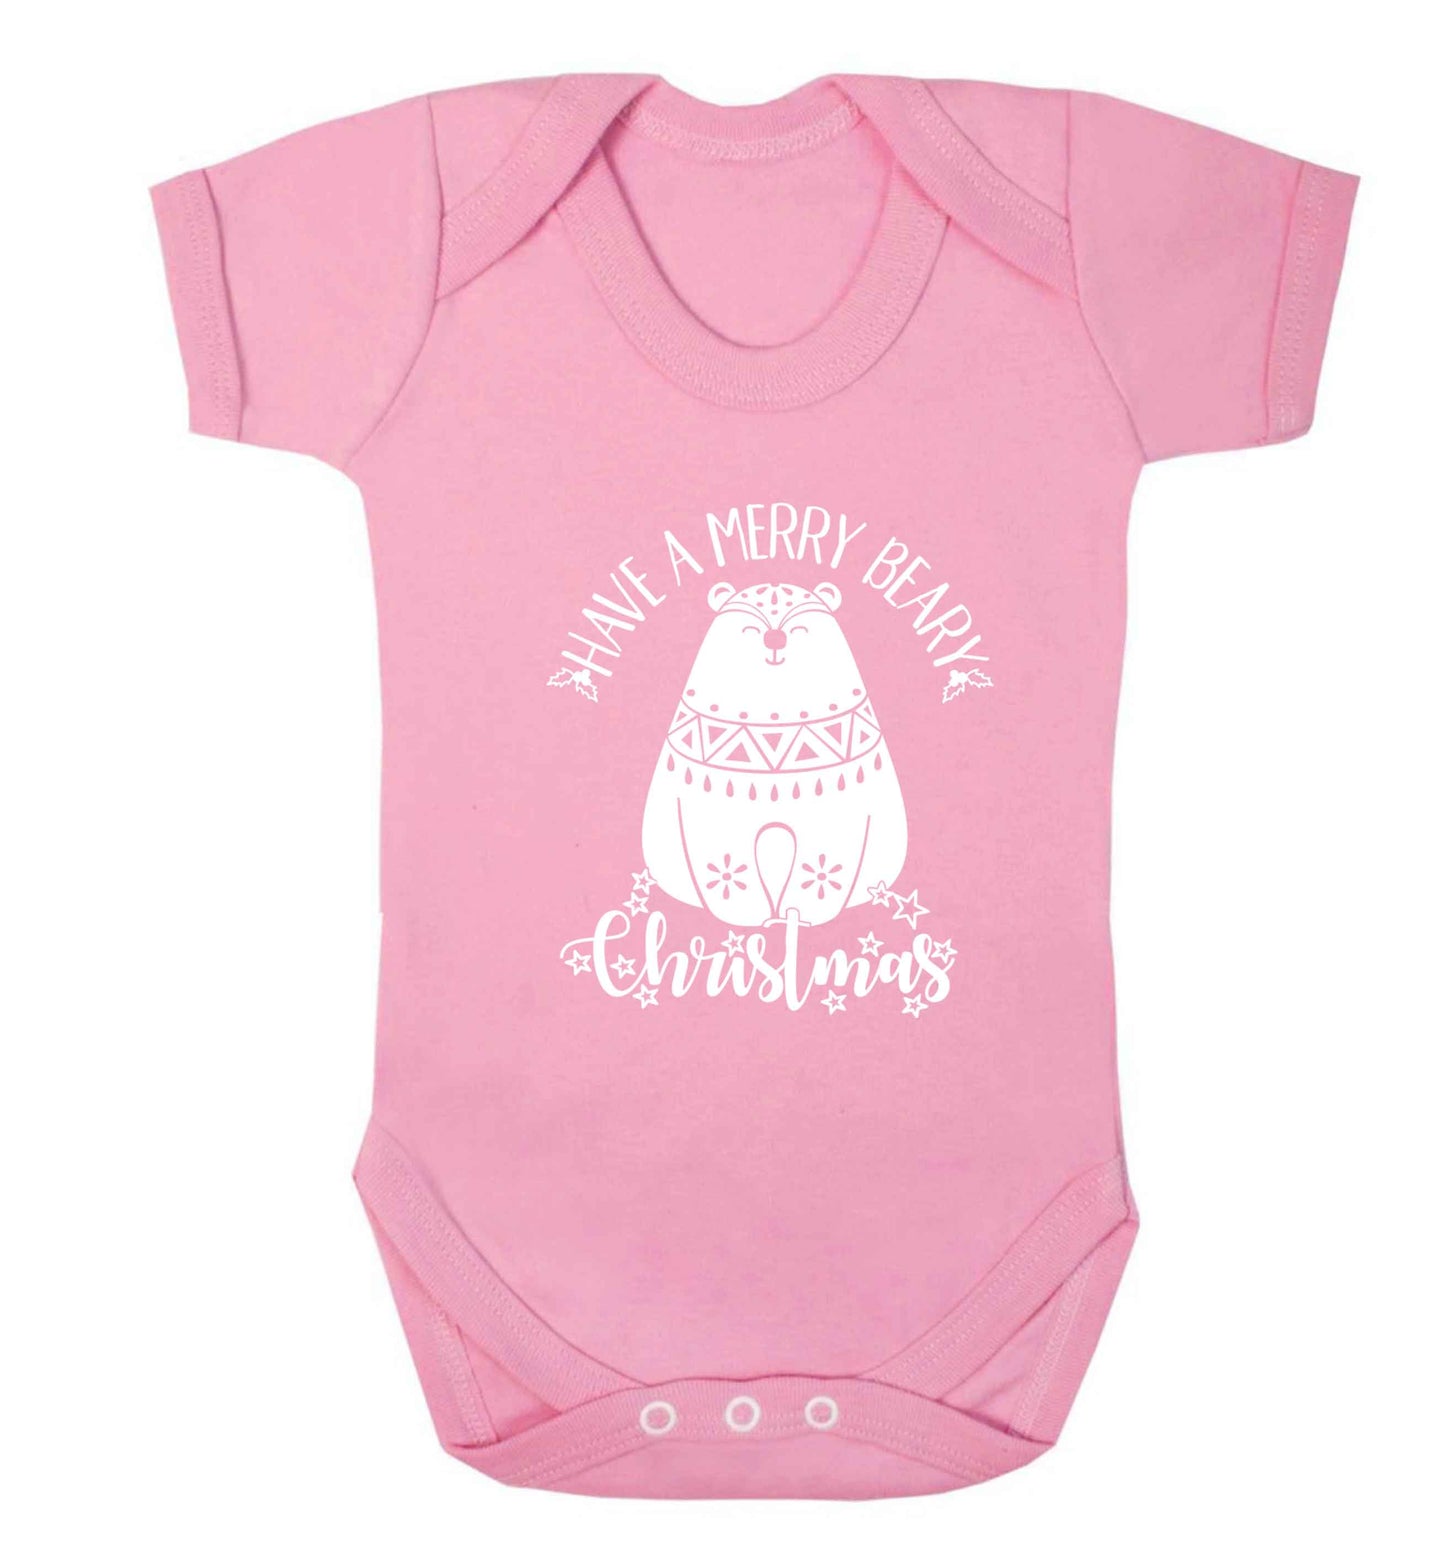 Have a merry beary Christmas Baby Vest pale pink 18-24 months